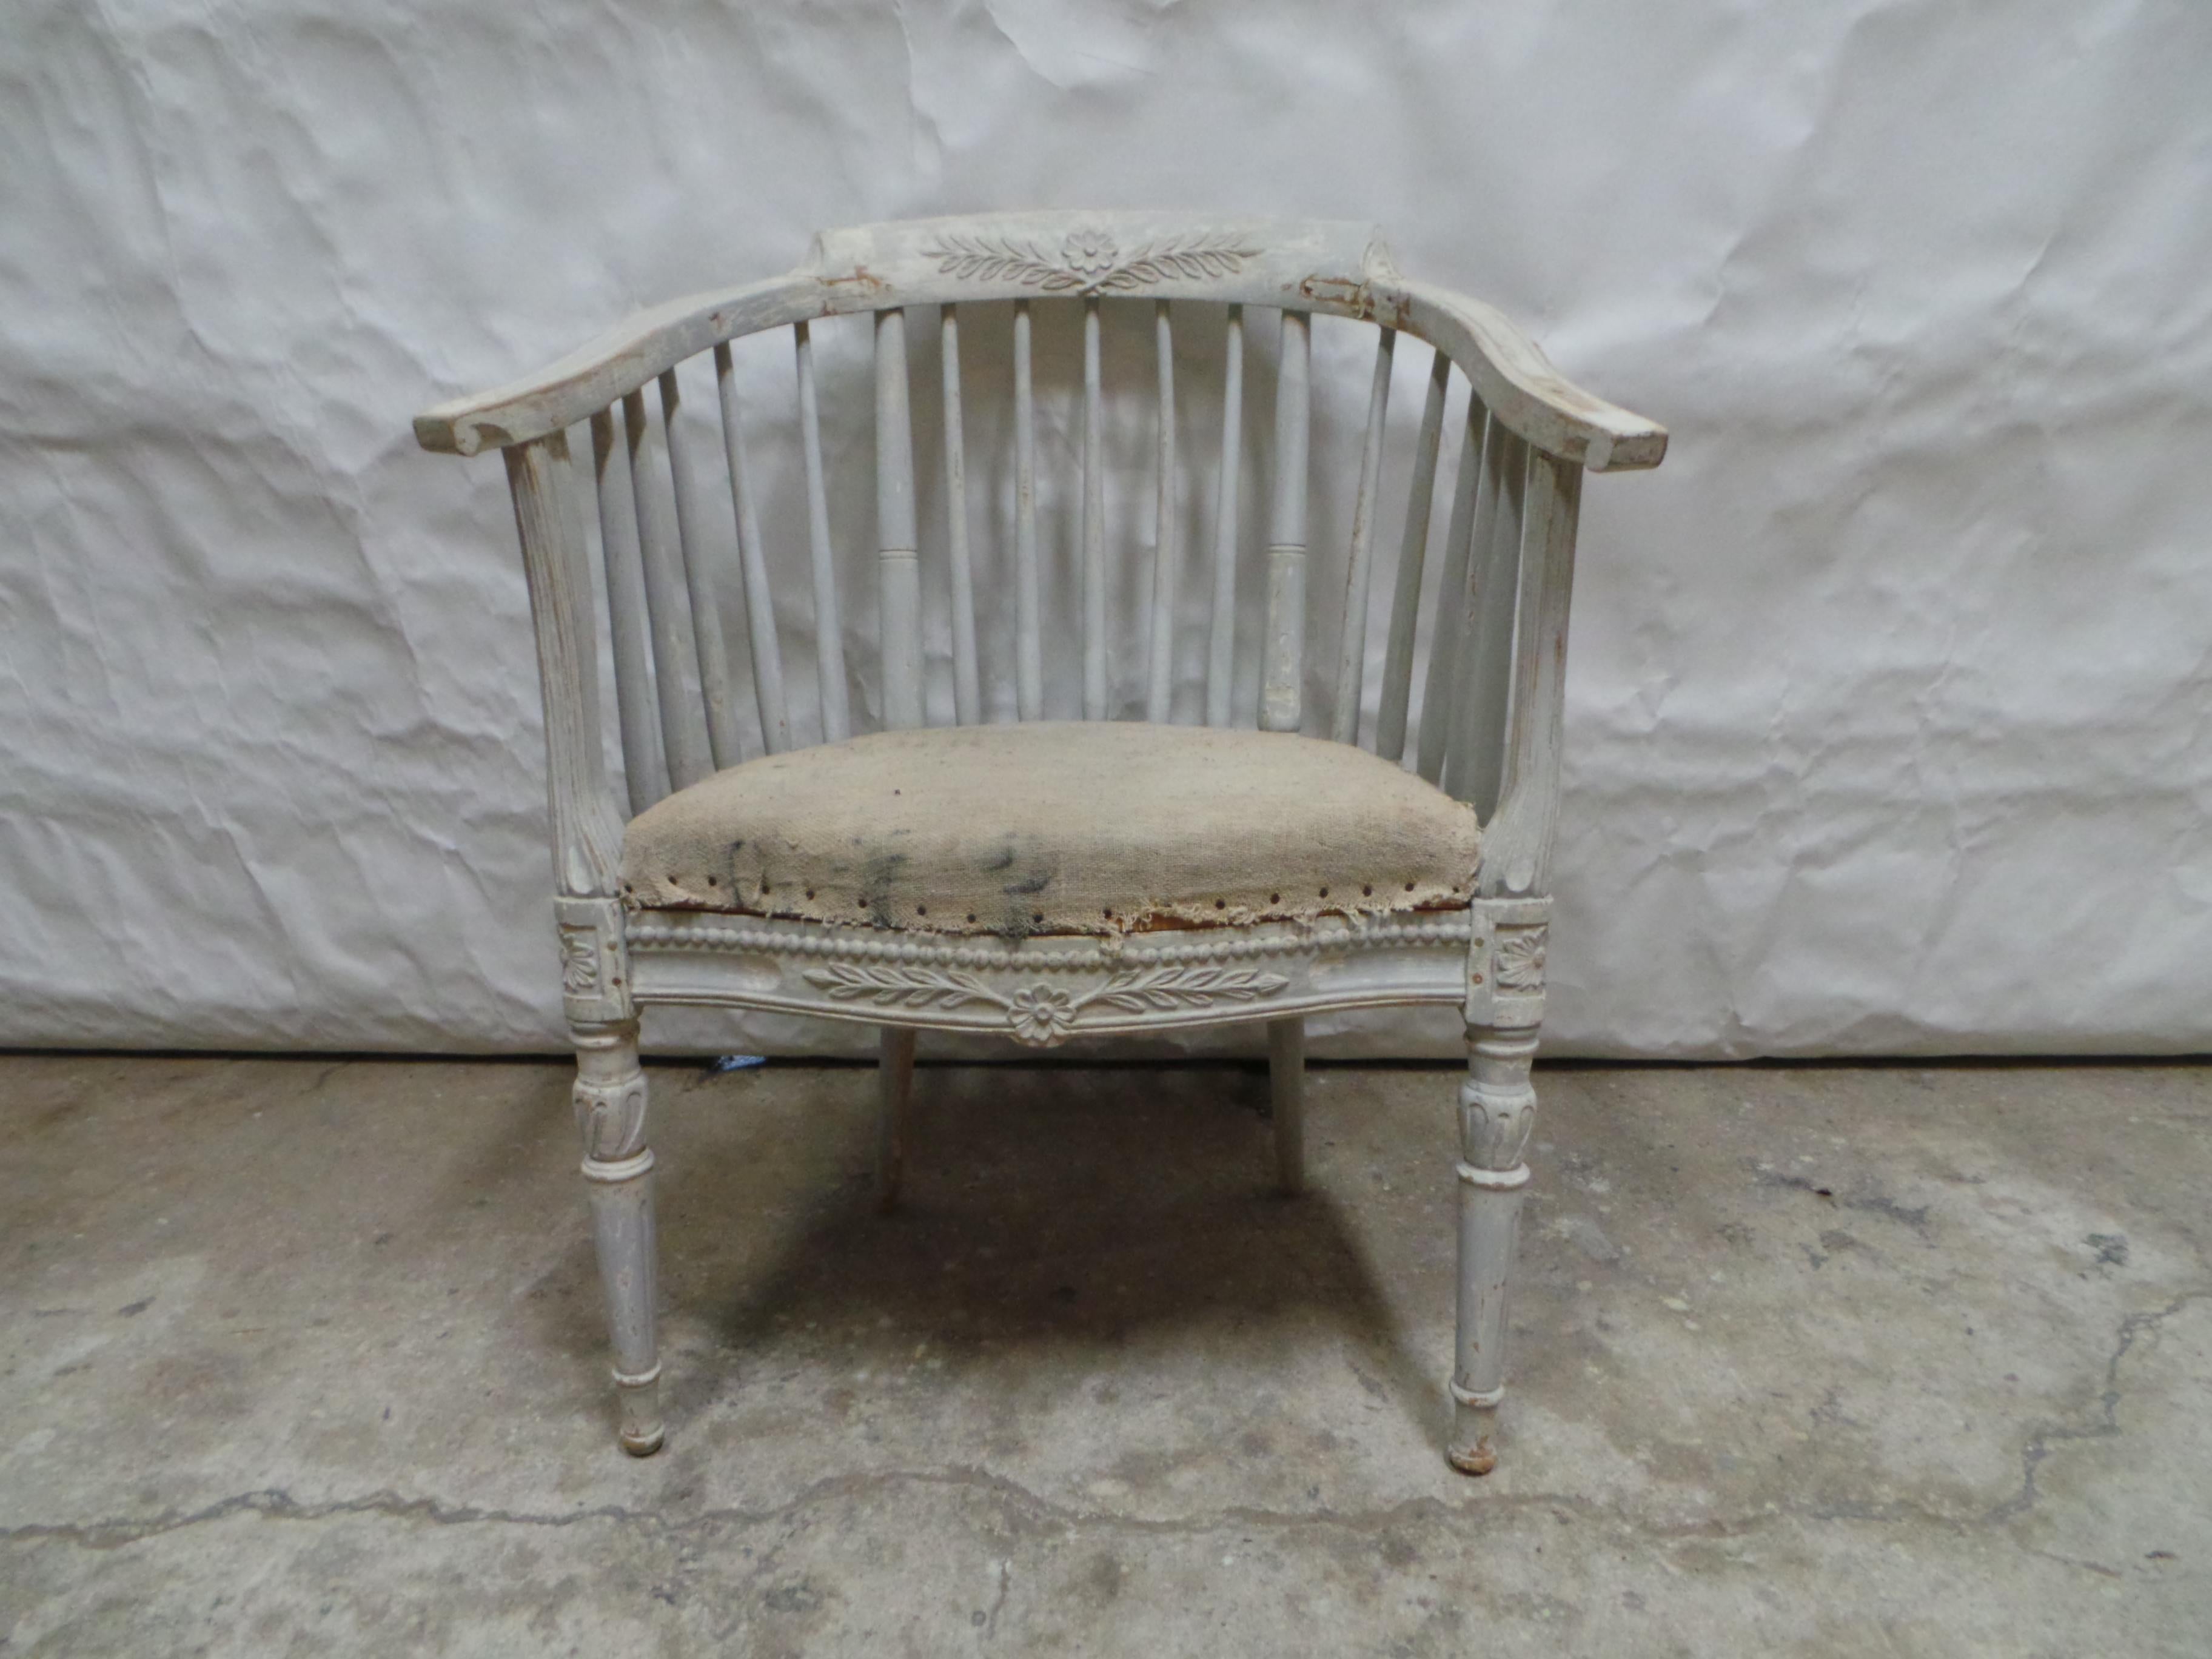 This is a Swedish Gustavian Barrel Chair in 100% Original condition.